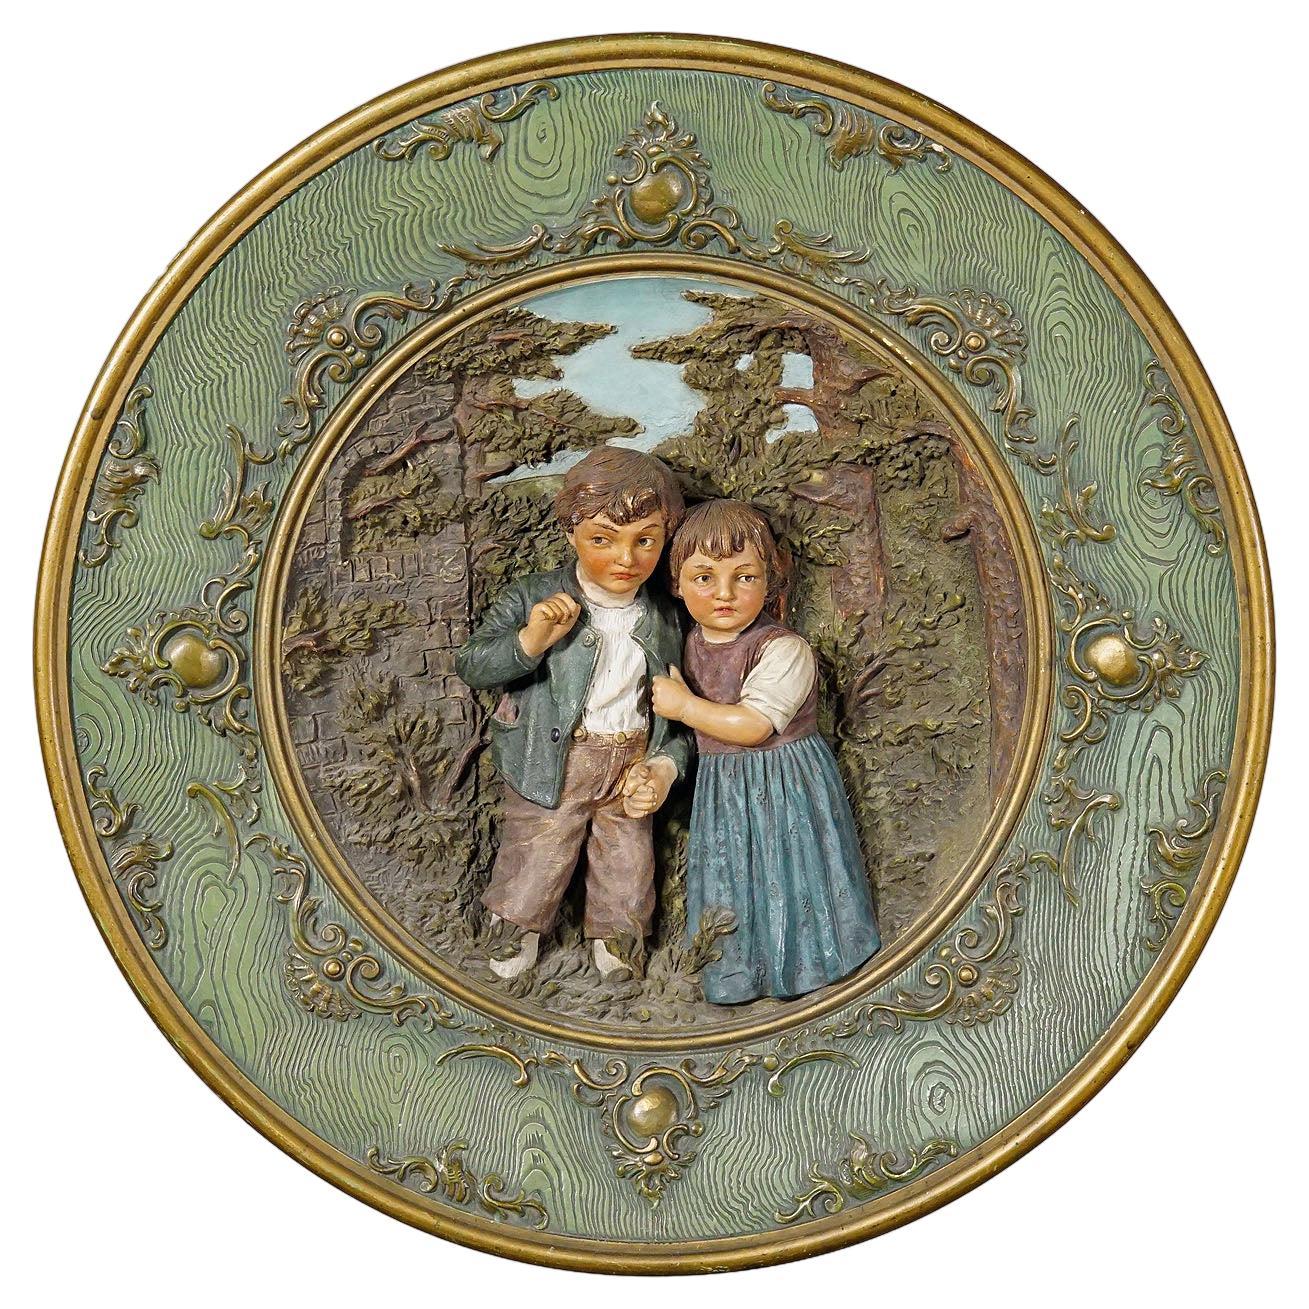 Terracotta Wall Plate with Whimsy Children in Farmer Costumes by Johann Maresch